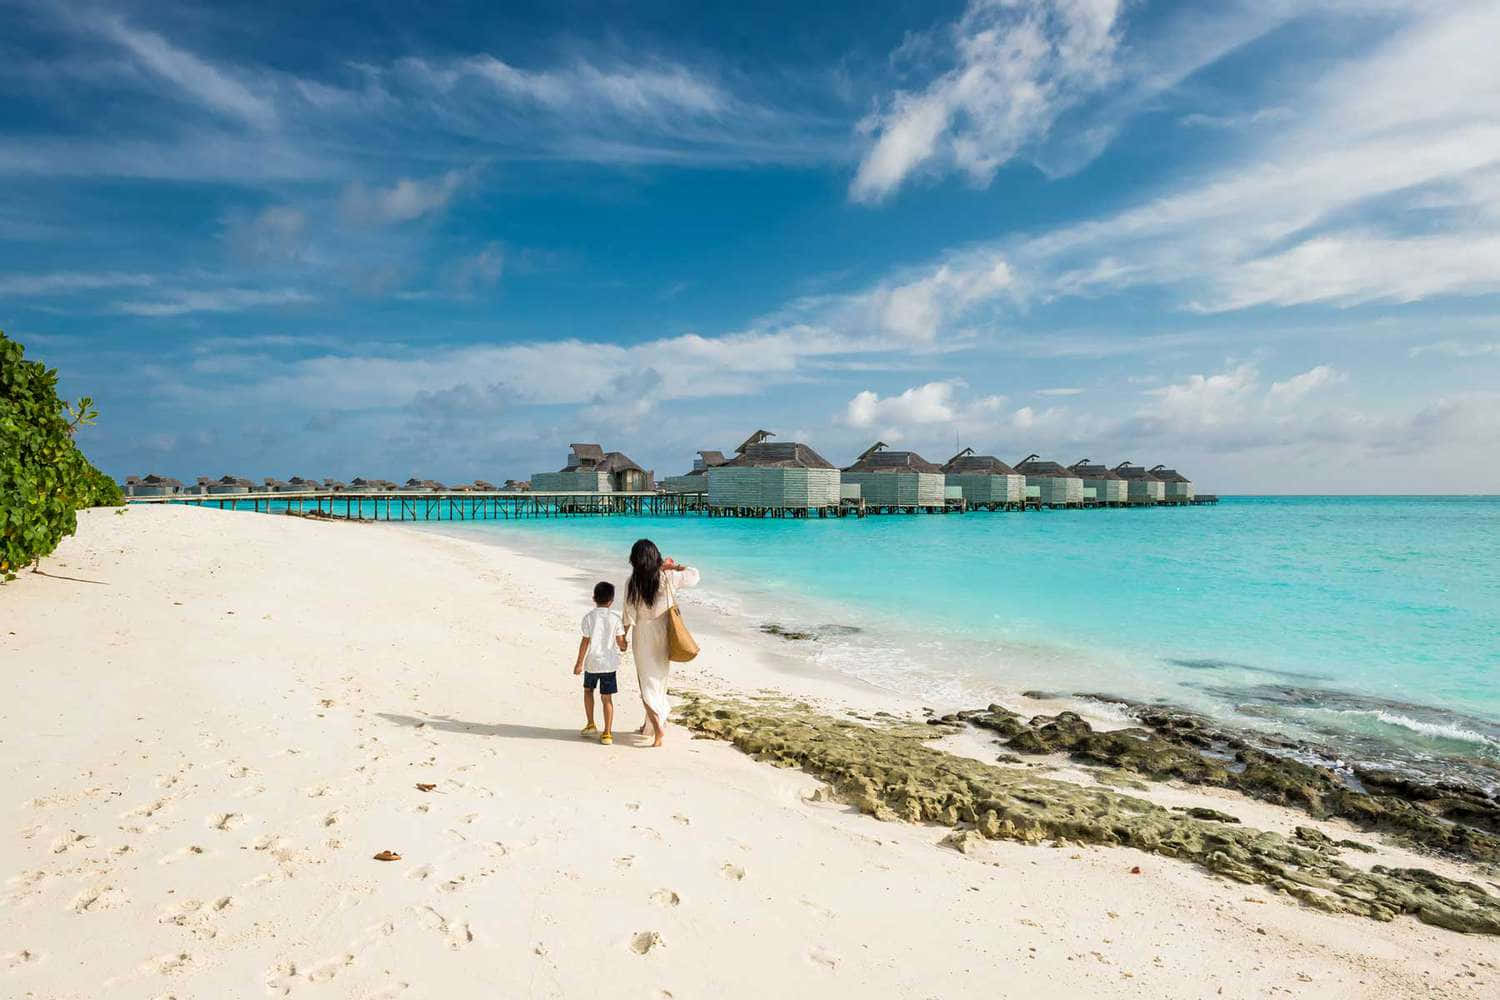 Rejuvenate yourself in clear turquoise blue waters of Maldives